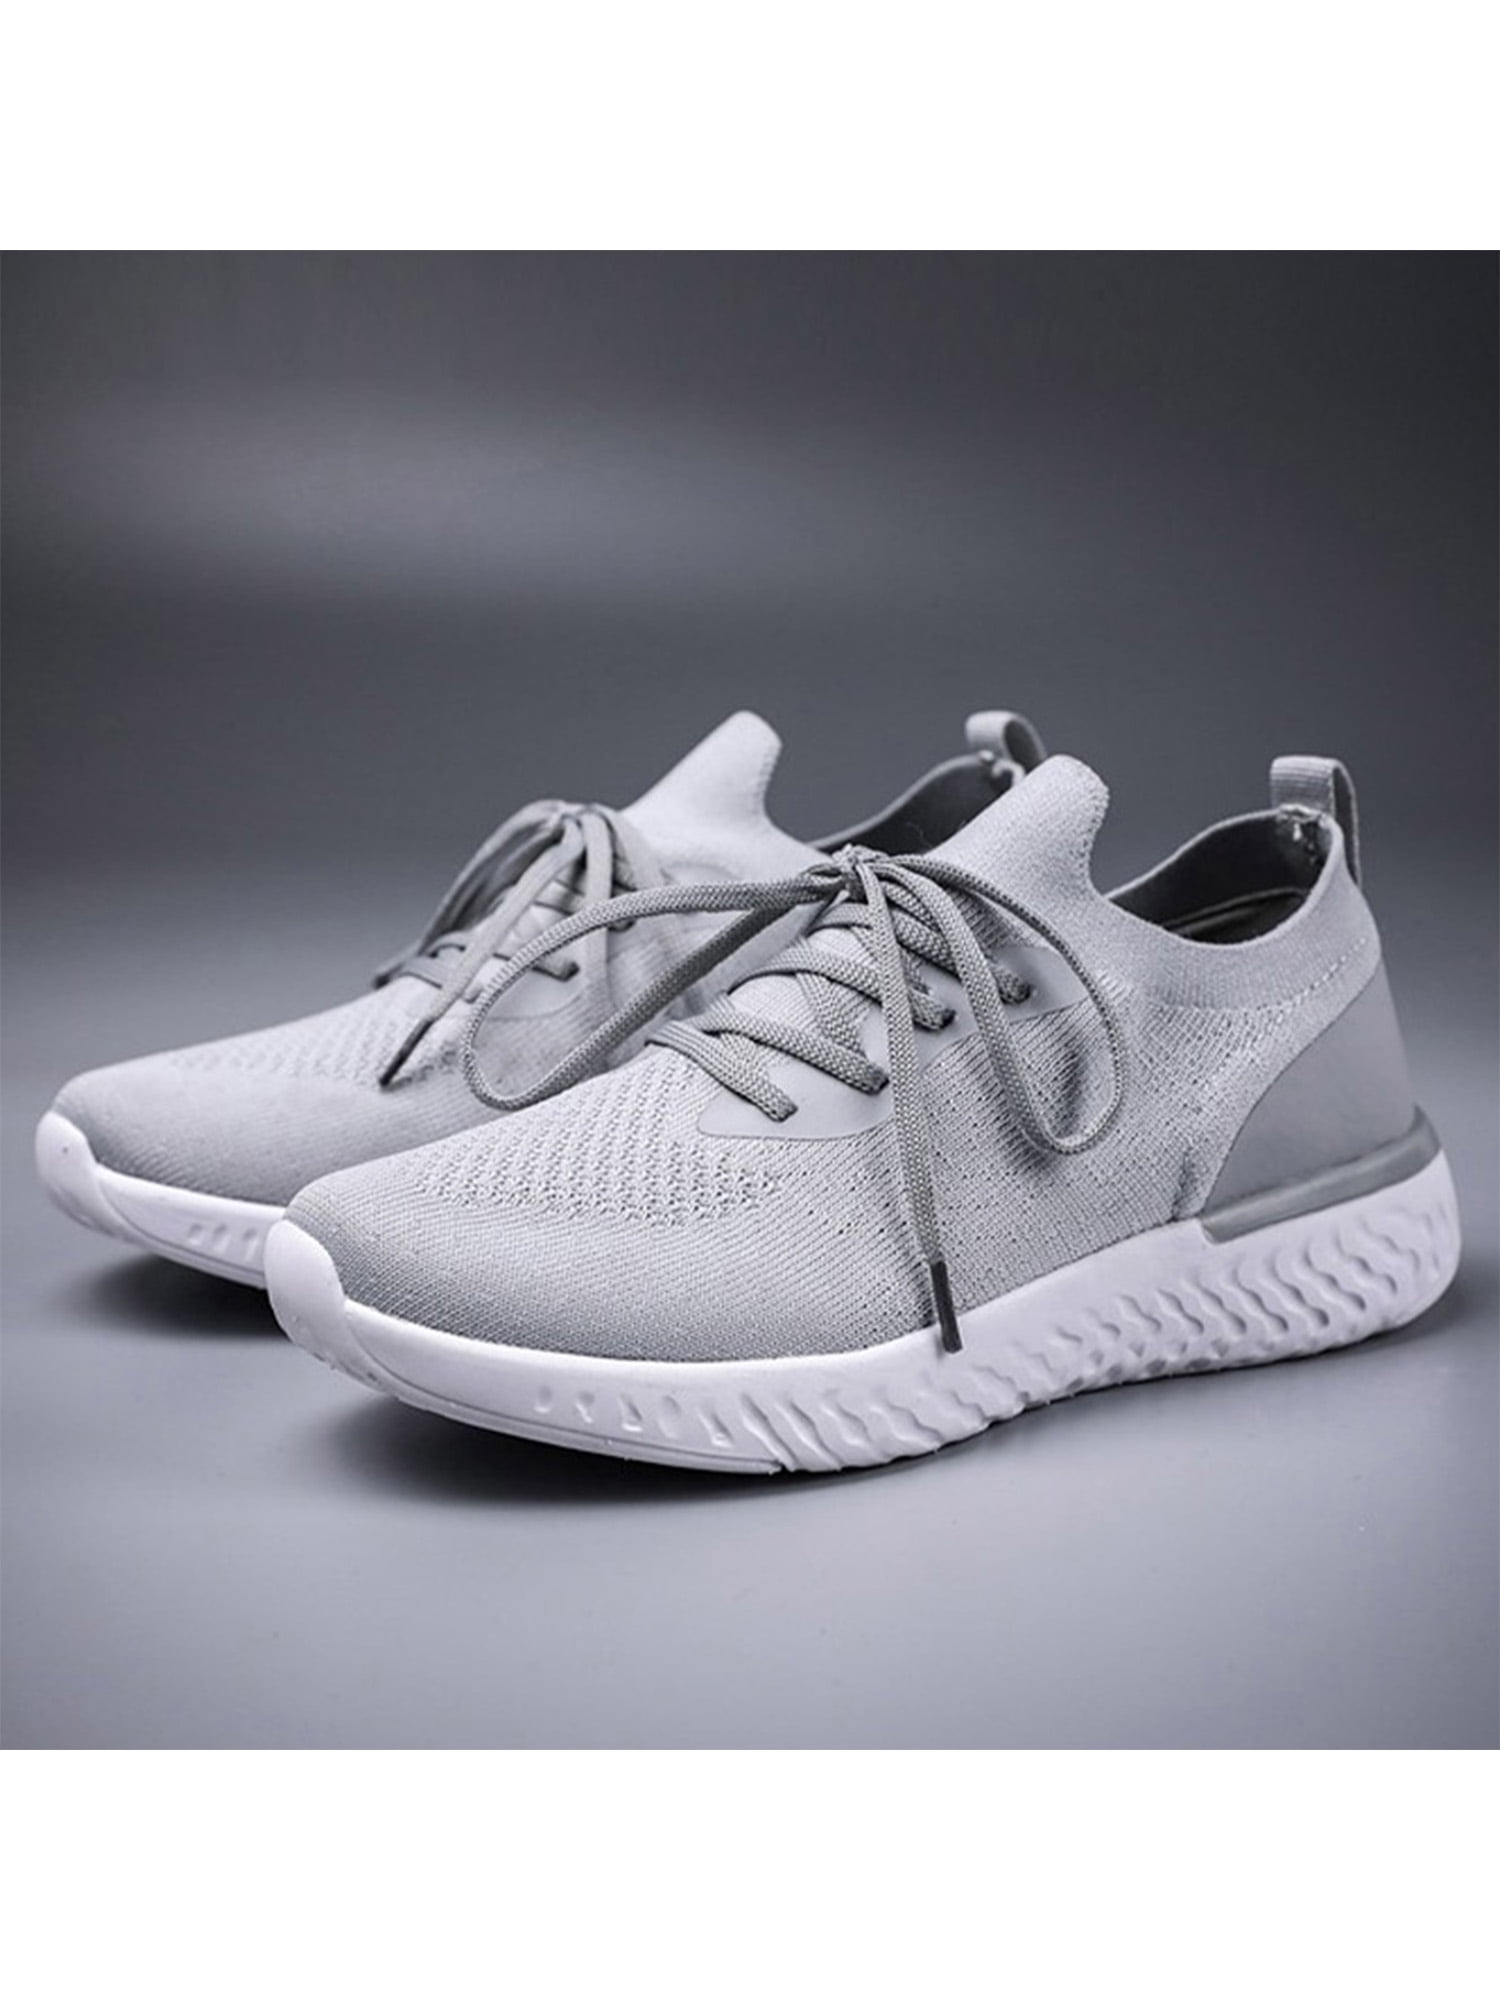 Men's Slip On Sports Running Shoes Outdoor Athletic Jogging Tennis Sneakers Gym 